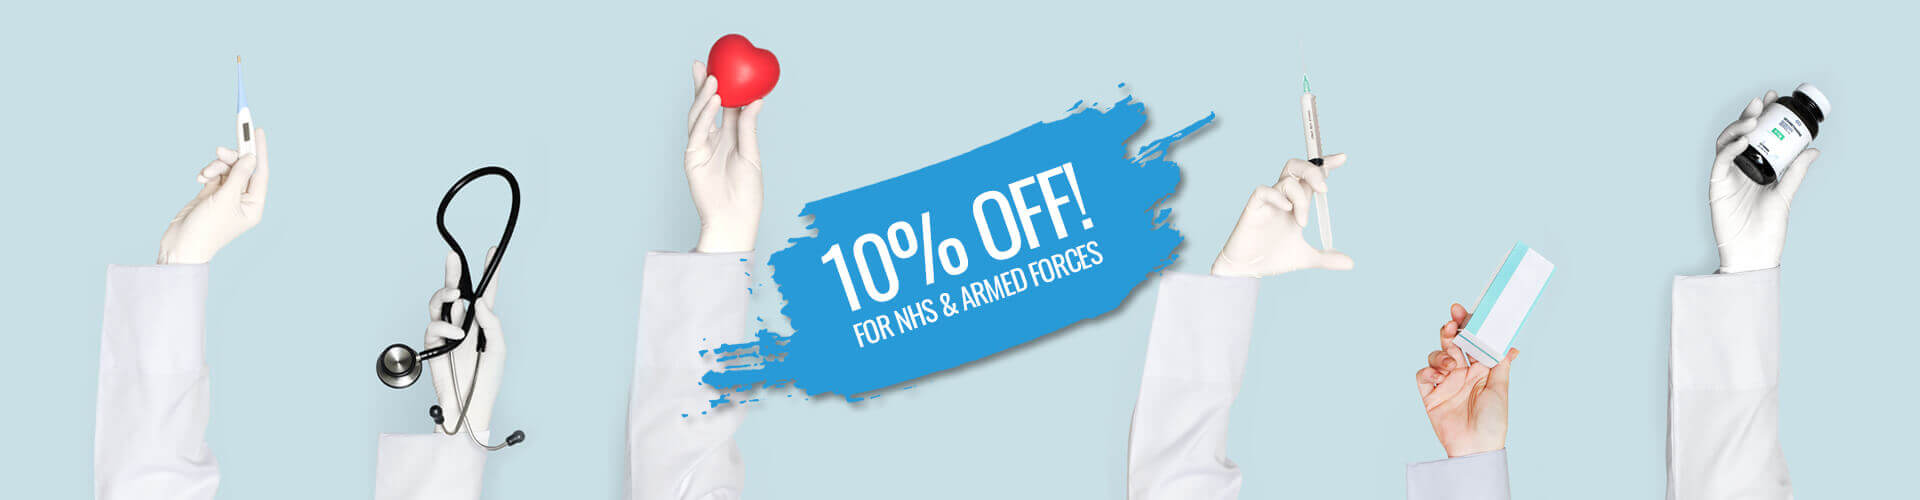 NHS & Armed Forces Discount on Holidays